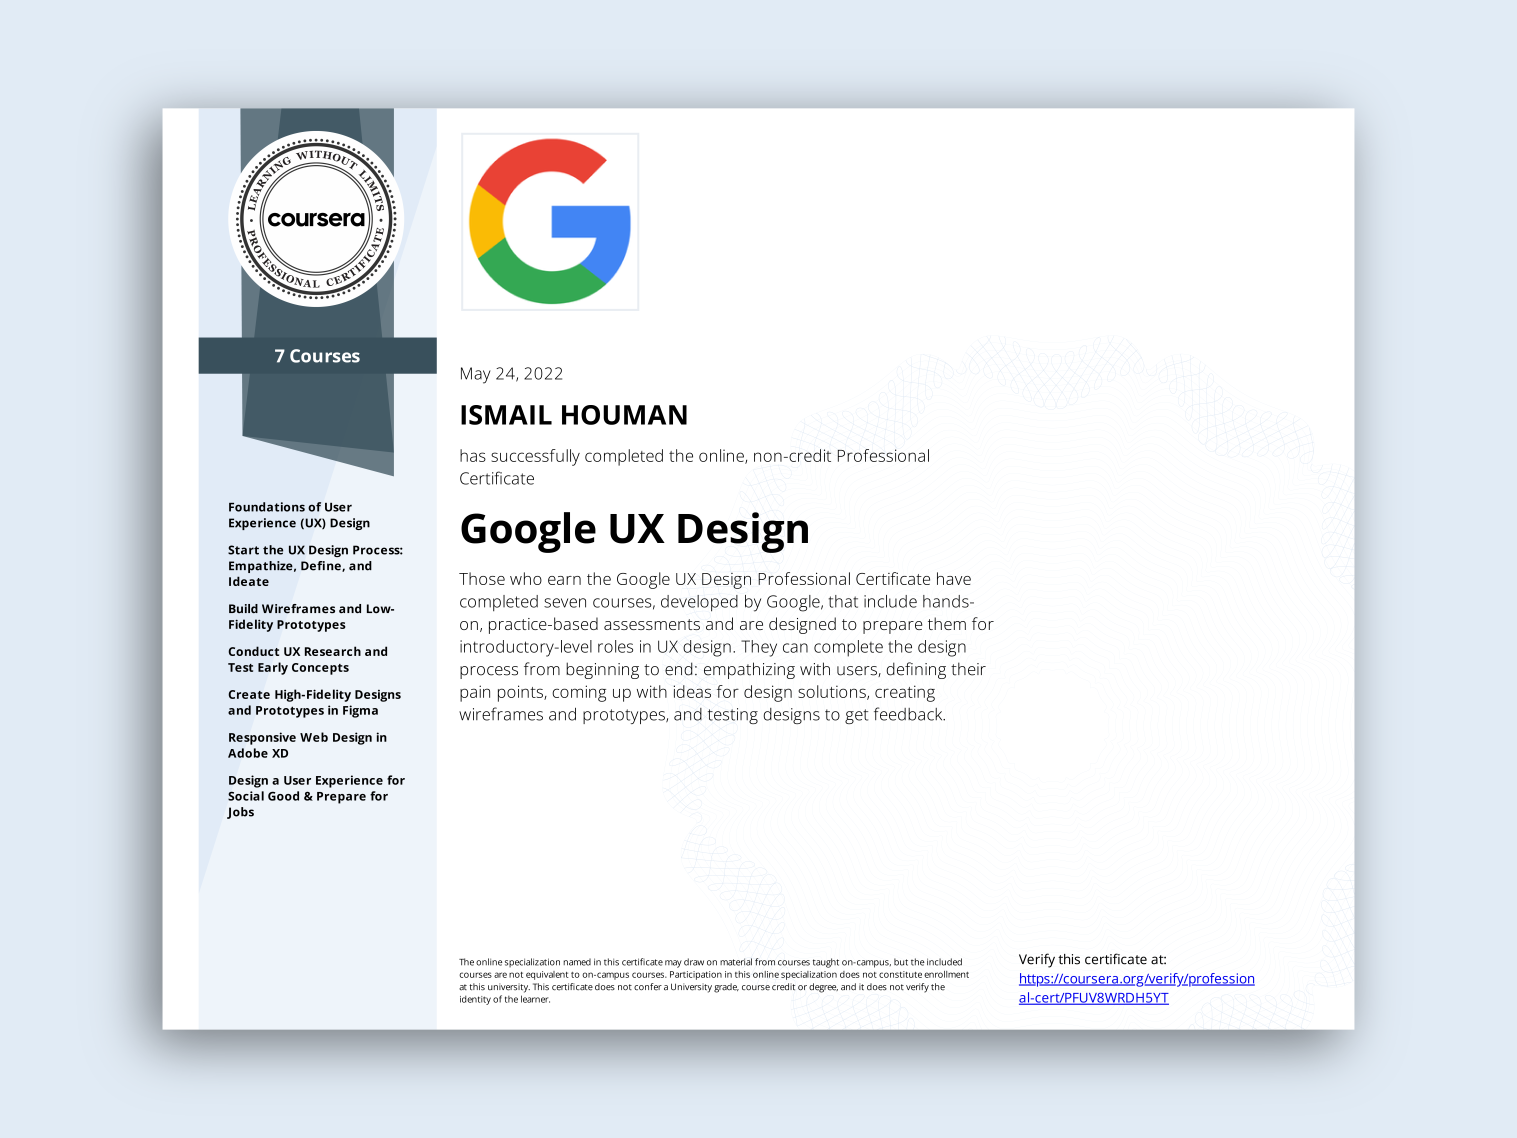 May 24 2022: Google UX Design Certificate Coursera by Ismail Houman